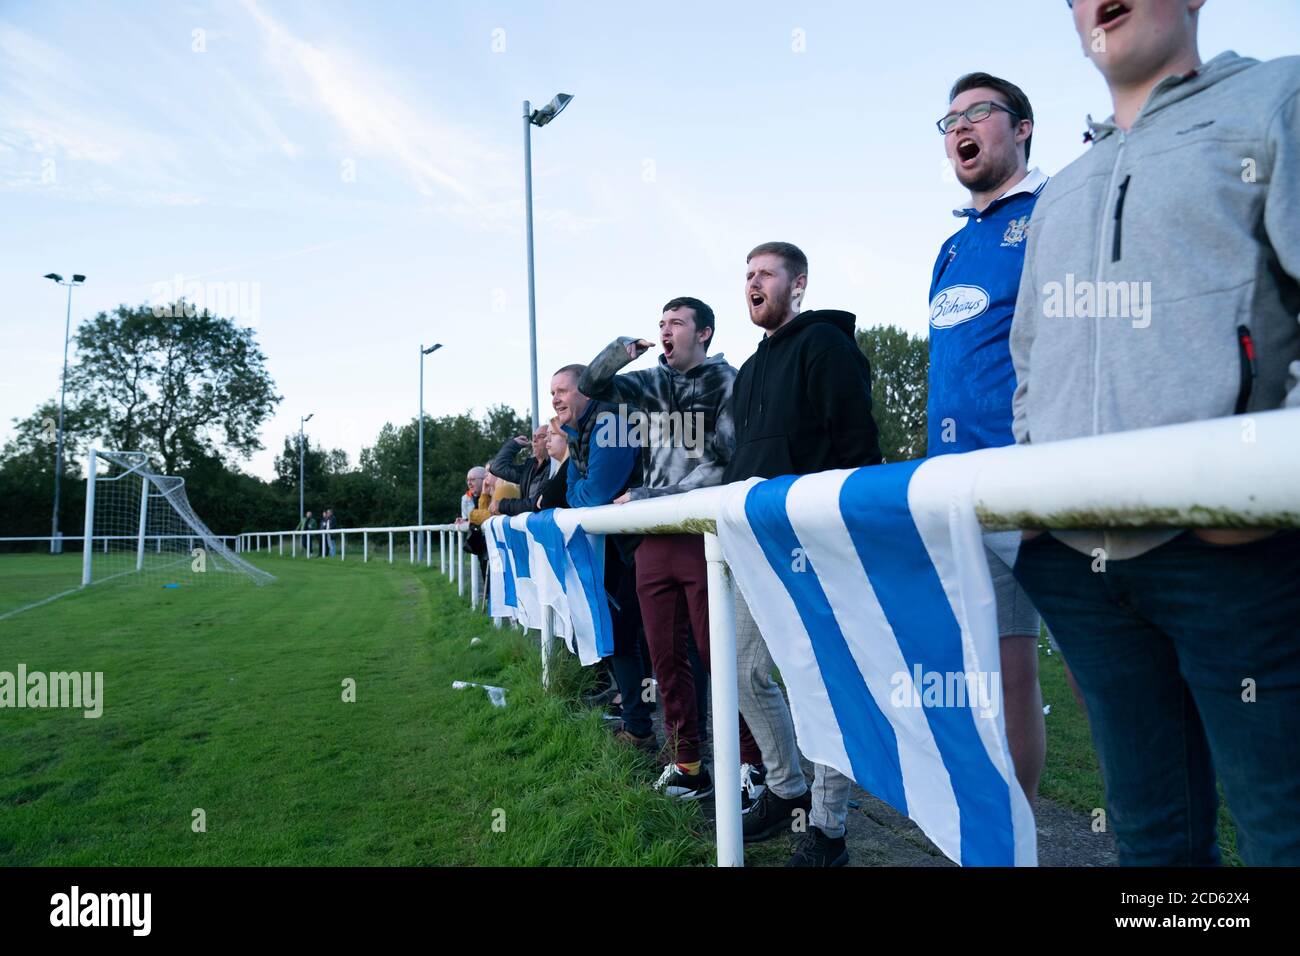 Bolton, UK. 26th August, 2020. Bury AFC supporters watch their teamÕs first competitive game in public, a Challenge match away to fellow North West Counties First Division North side Daisy Hill in the Westhoughton area of Bolton, UK. The Shakers phoenix club have played training games but it was announced on Monday that fans will be able to attend the game. Credit: Jon Super/Alamy Live News. Stock Photo